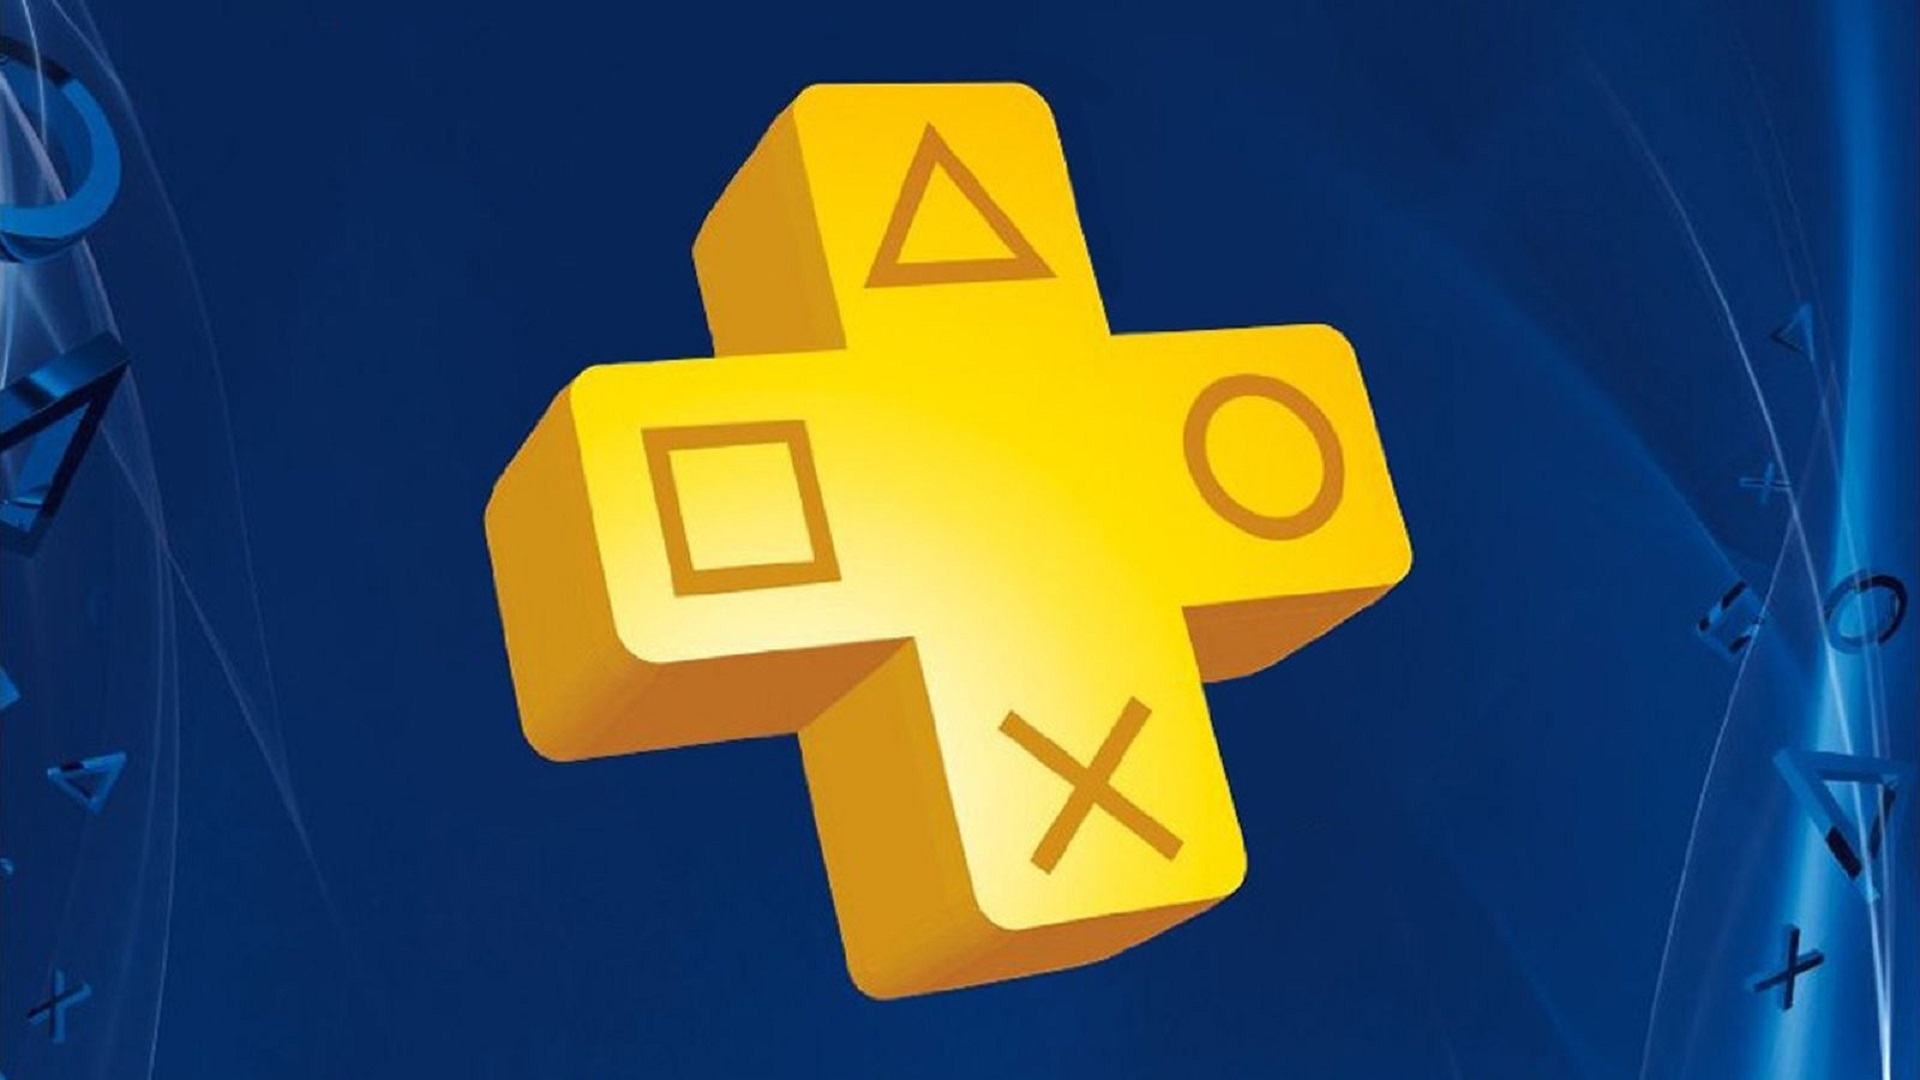 free playstation plus games august 2020